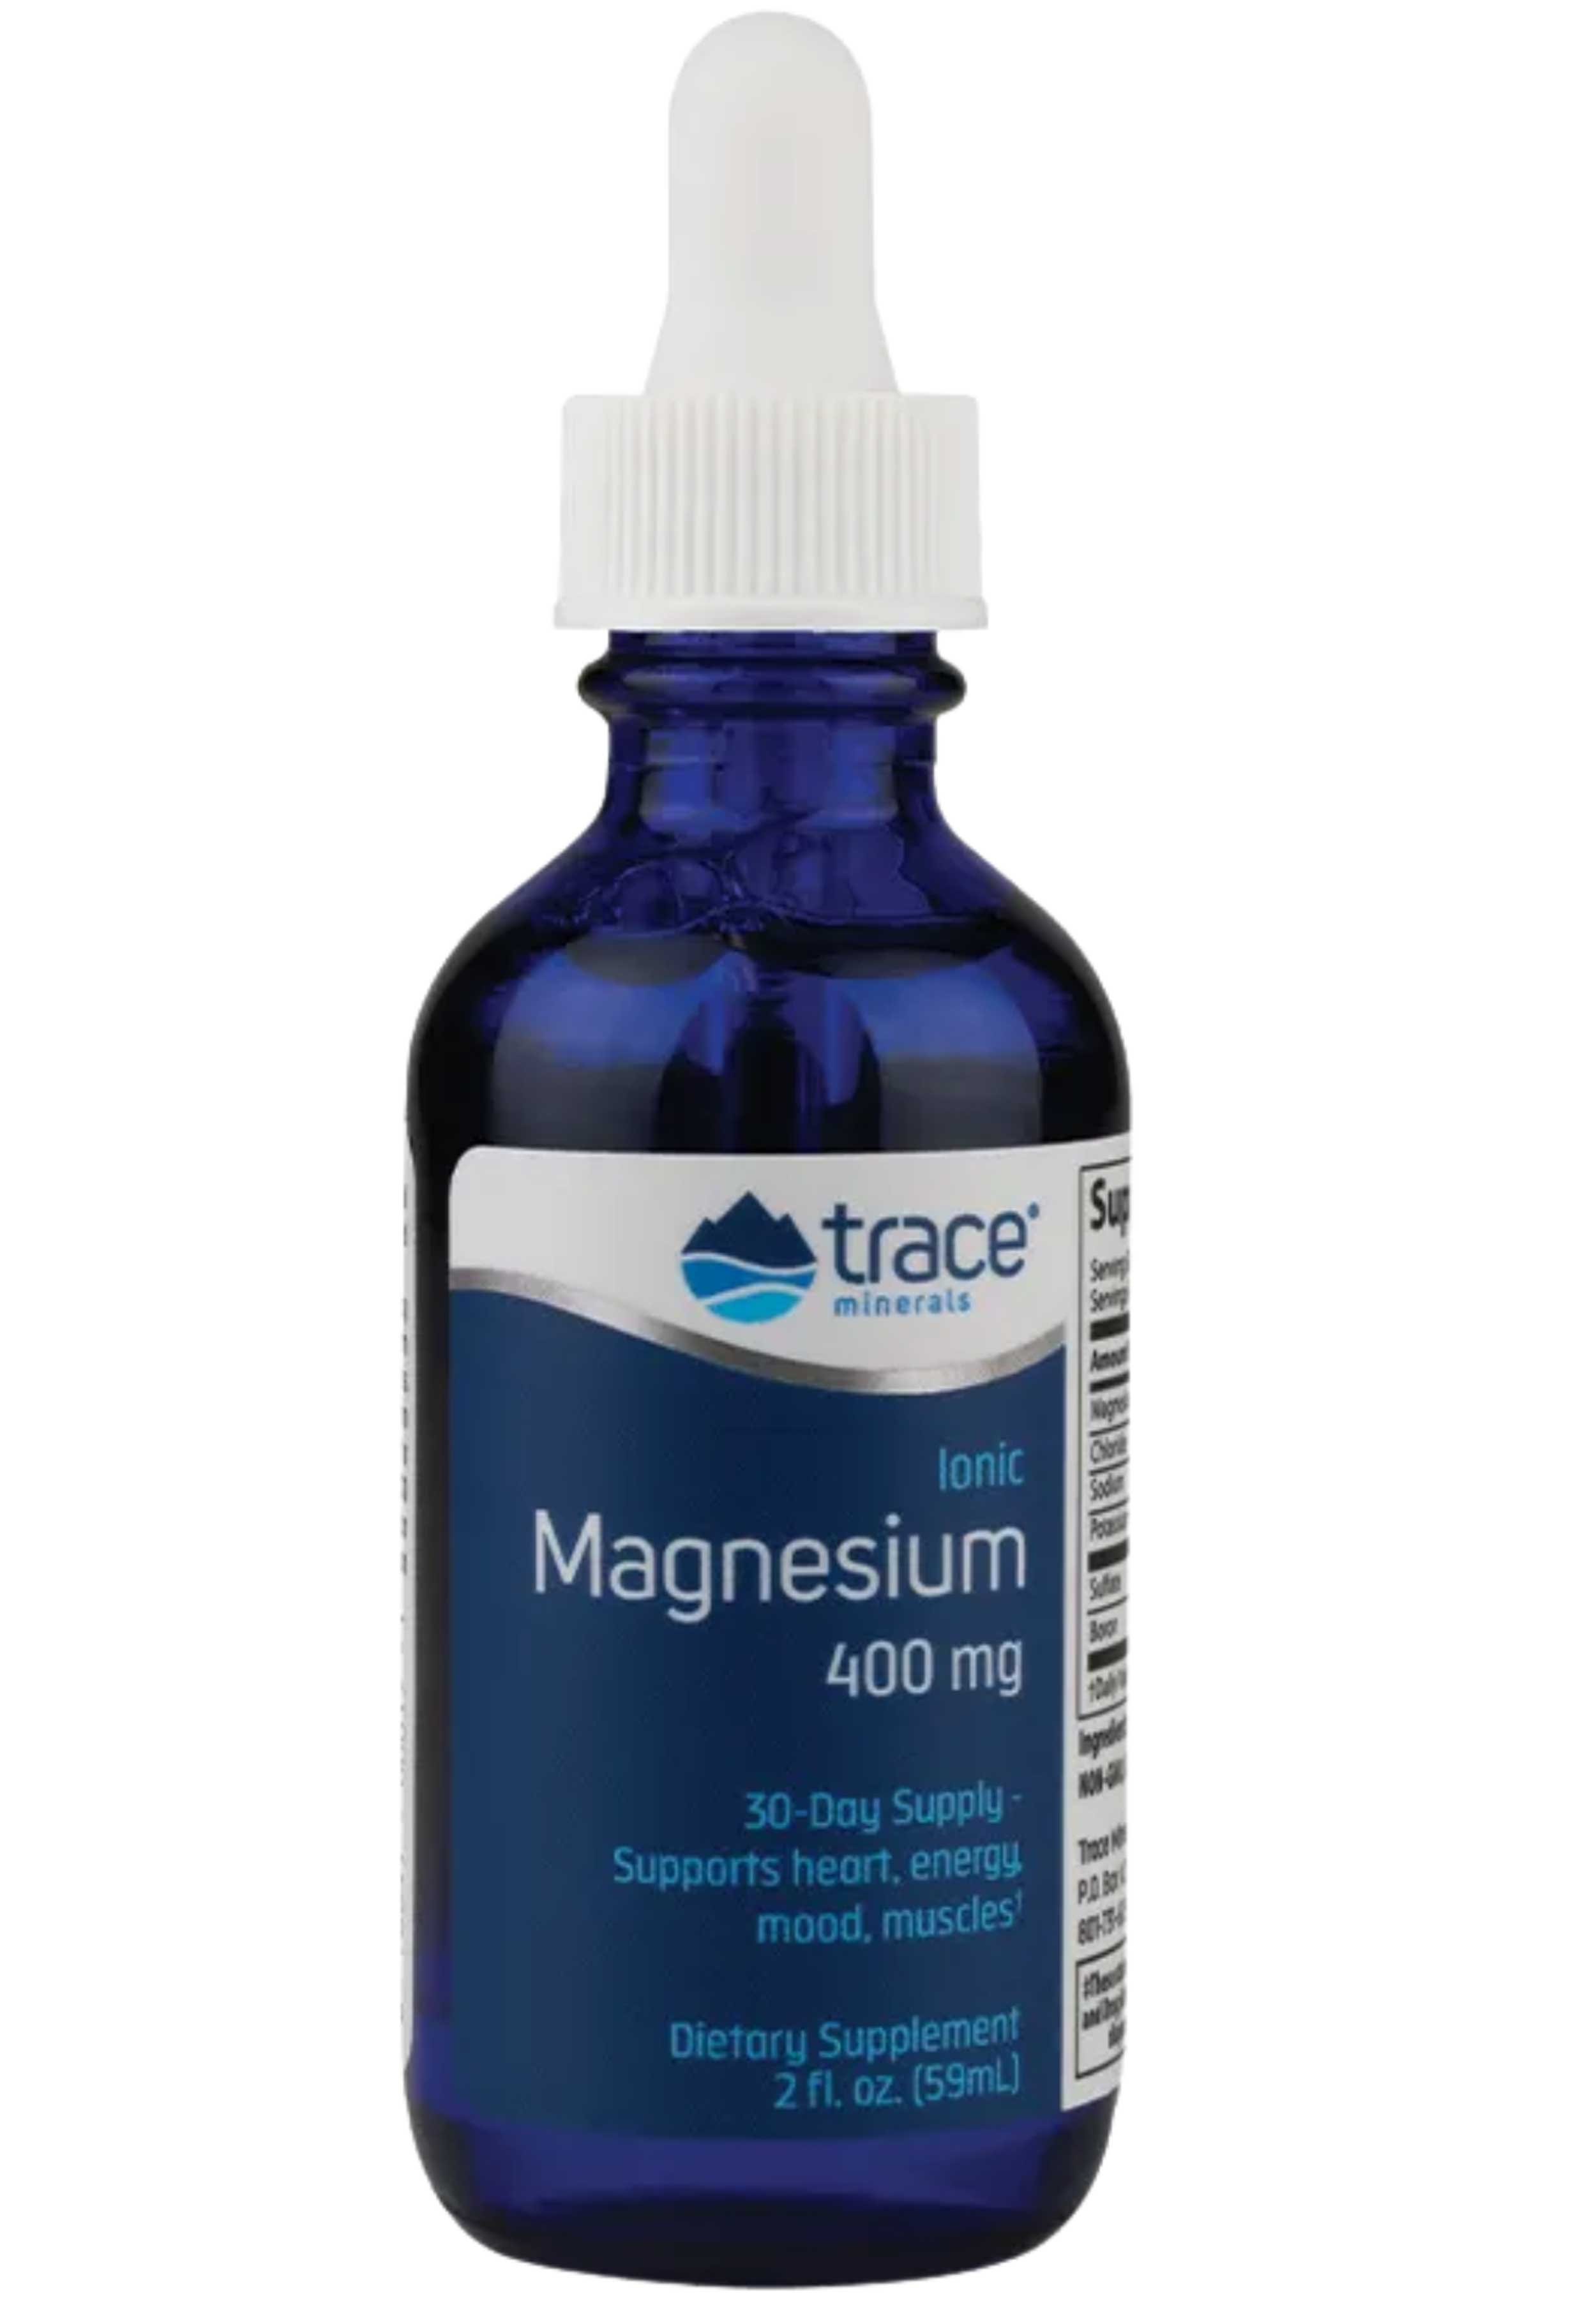 Trace Minerals Research Ionic Magnesium